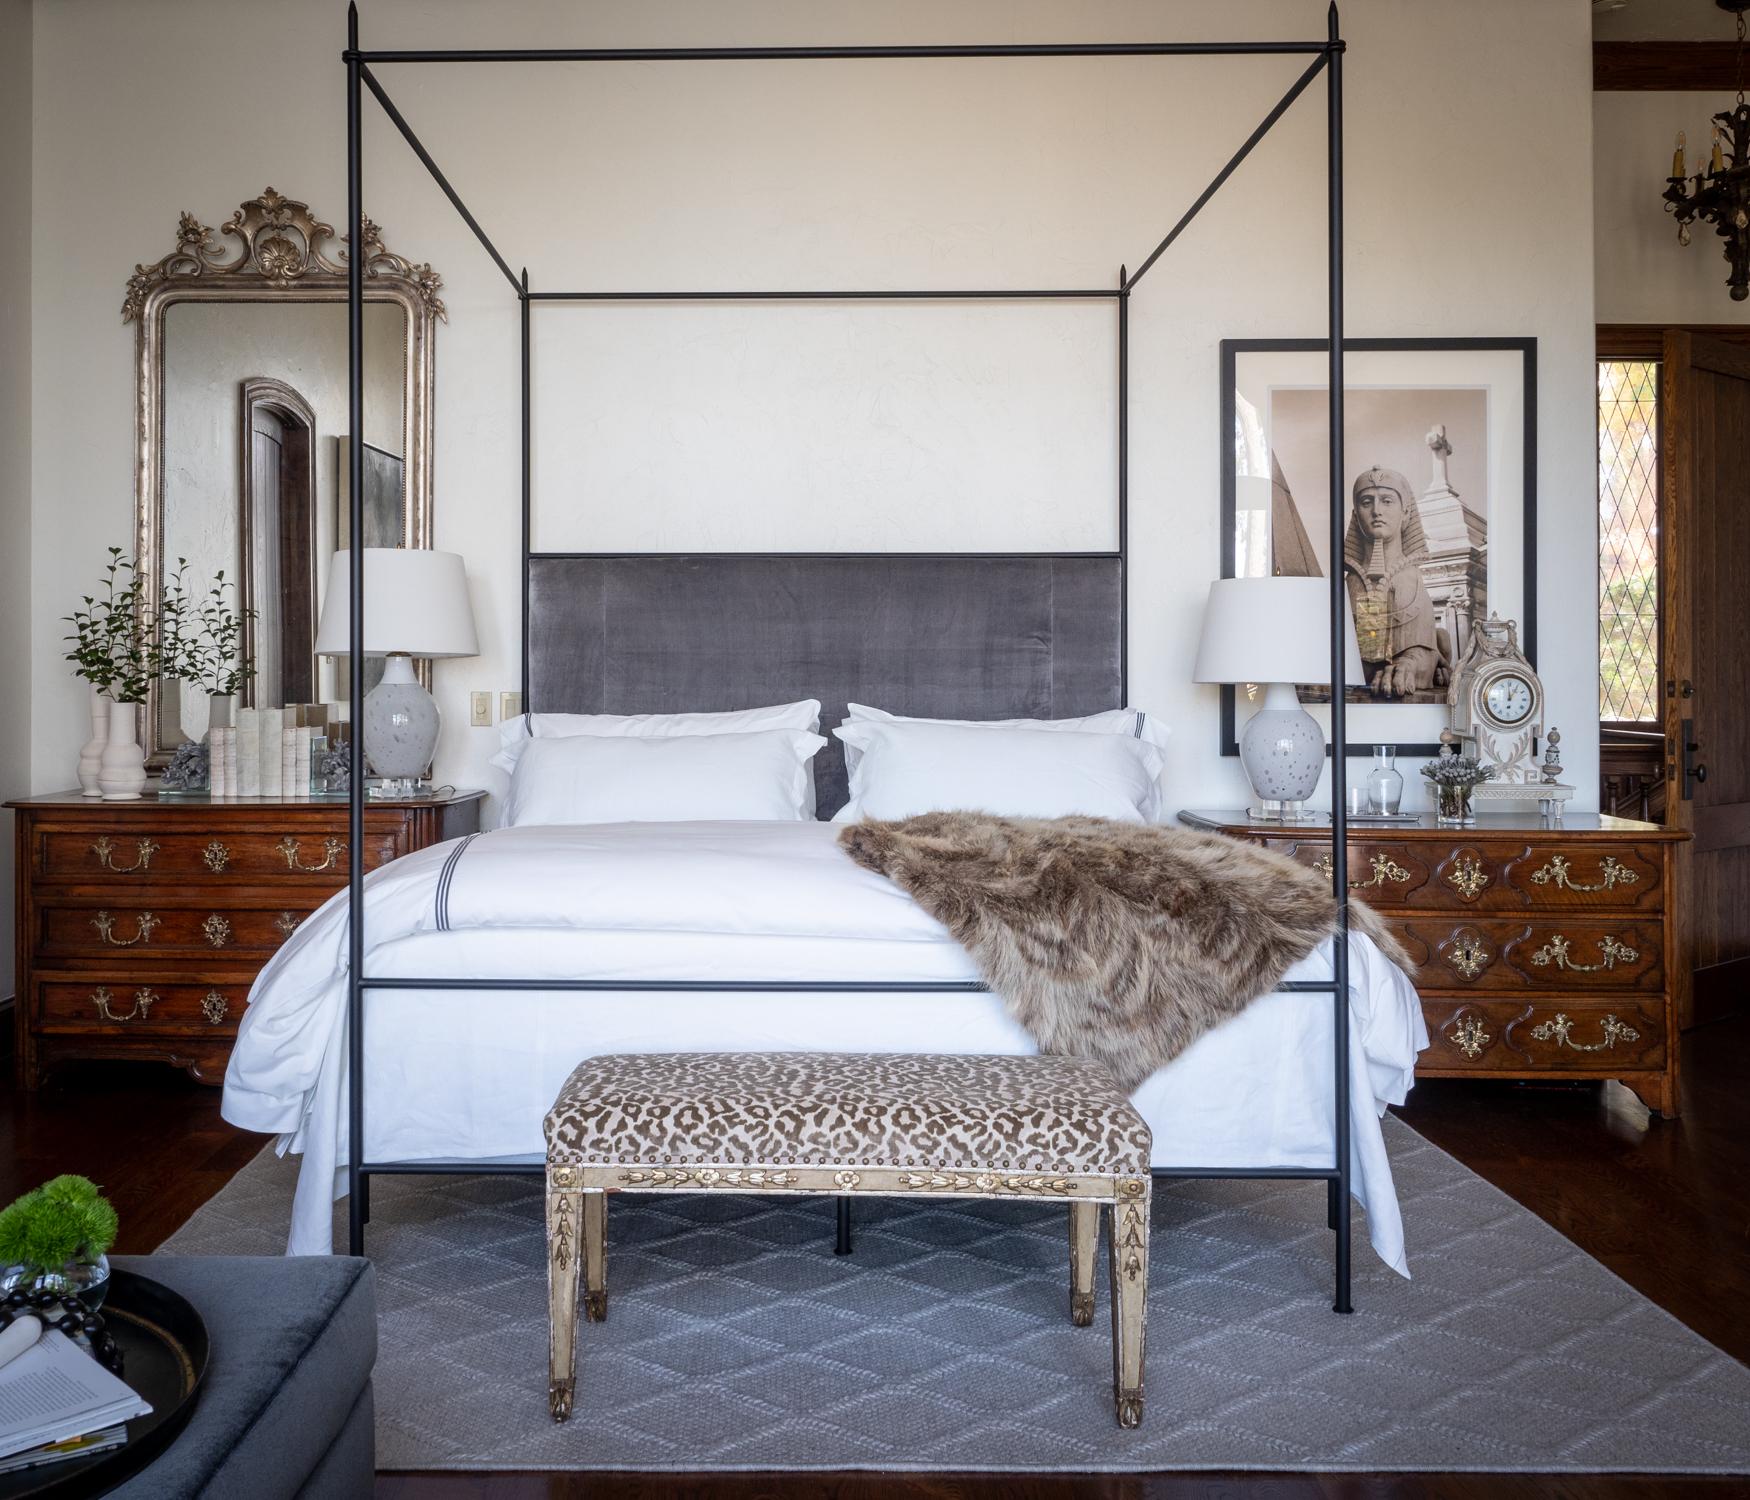 This Louis XVI-style canopy bed with upholstered headboard is from the custom Tara Shaw Maison collection. Handcrafted in New Orleans. Standard headboard upholstered in a oyster heavyweight Belgian linen. Available in king, calking, queen and twin